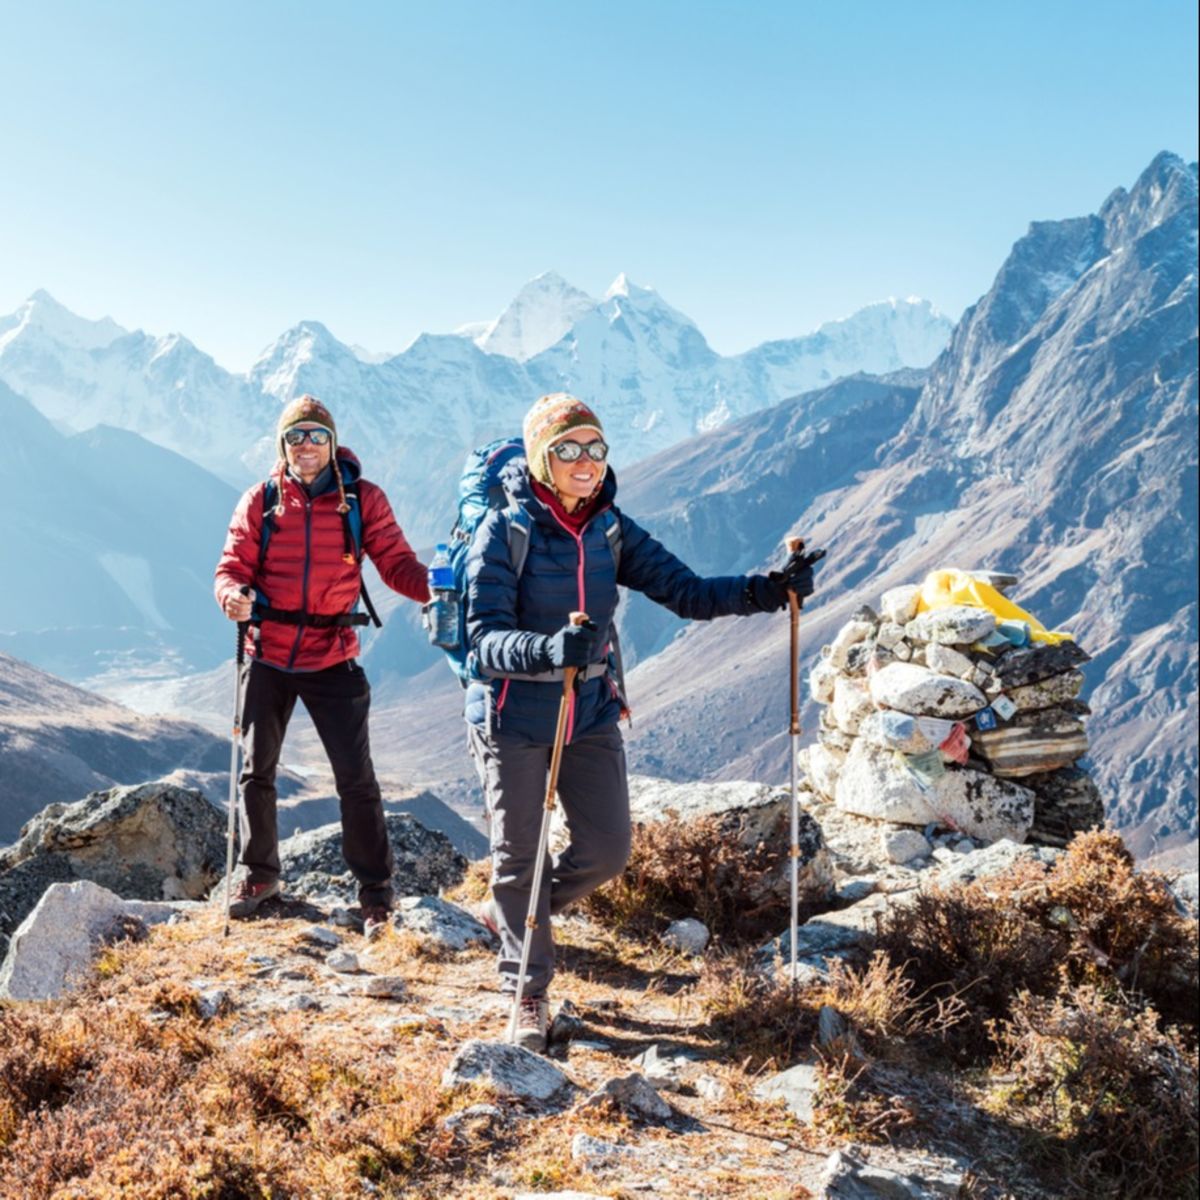 Trekkers with backpacks in mountains